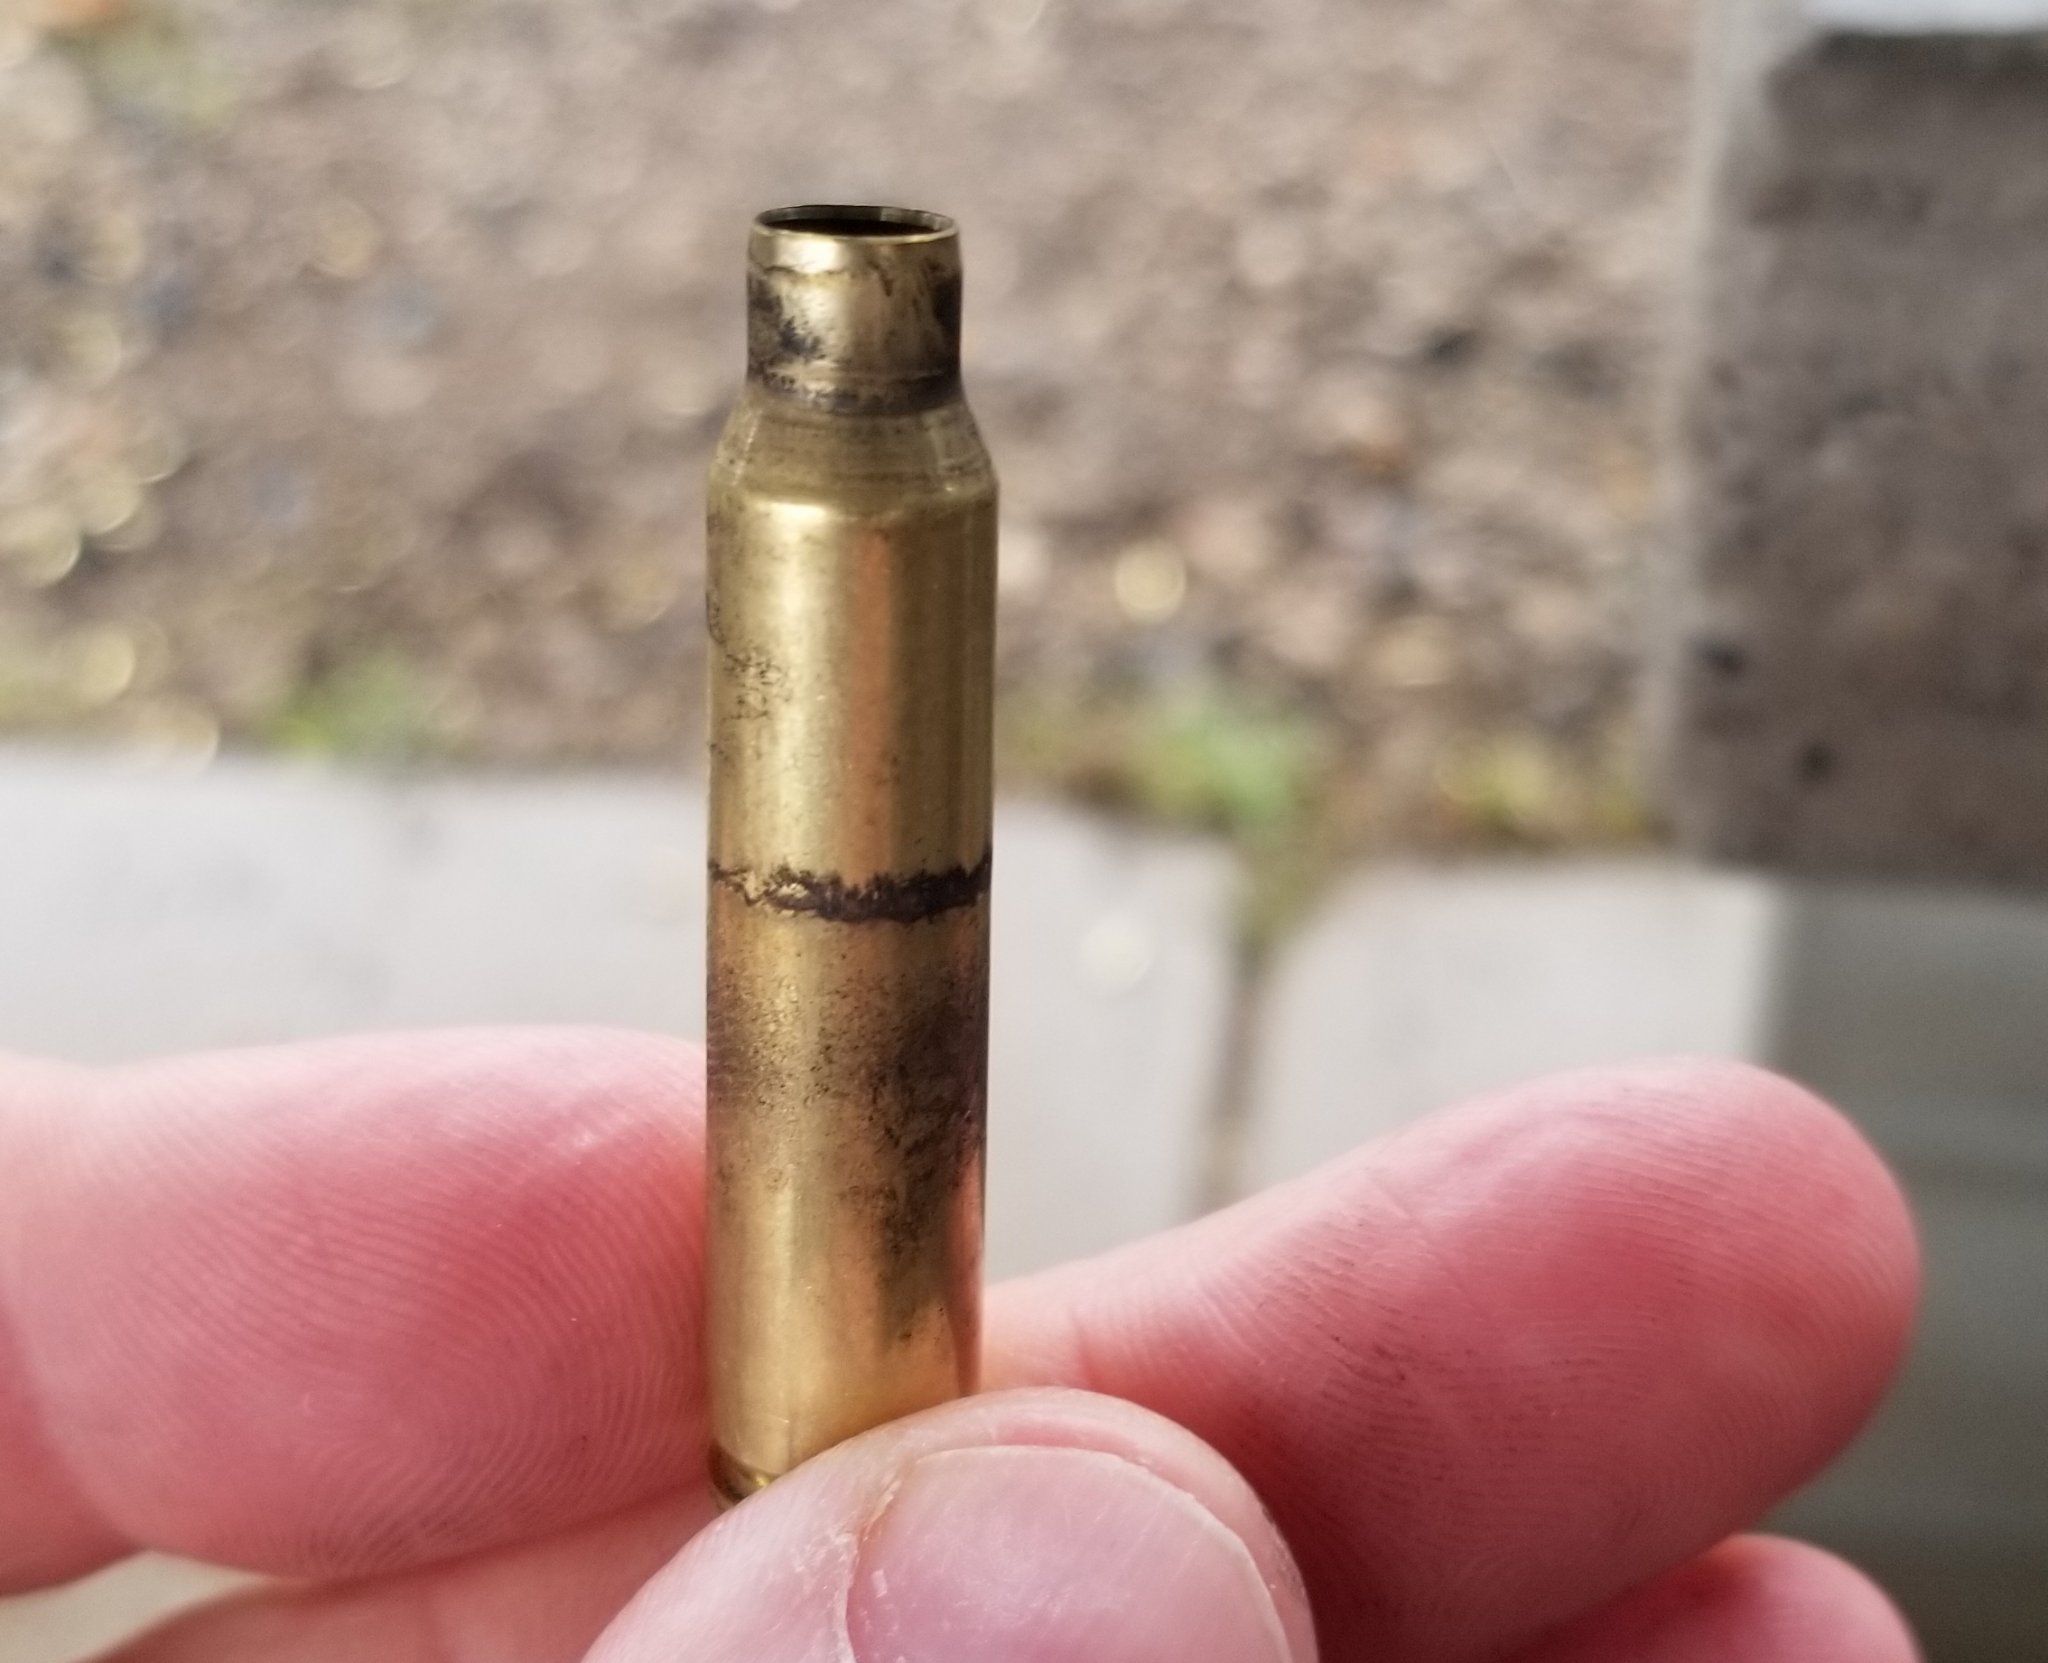 223 reloads - ugly groups, chuckles, and head scratching